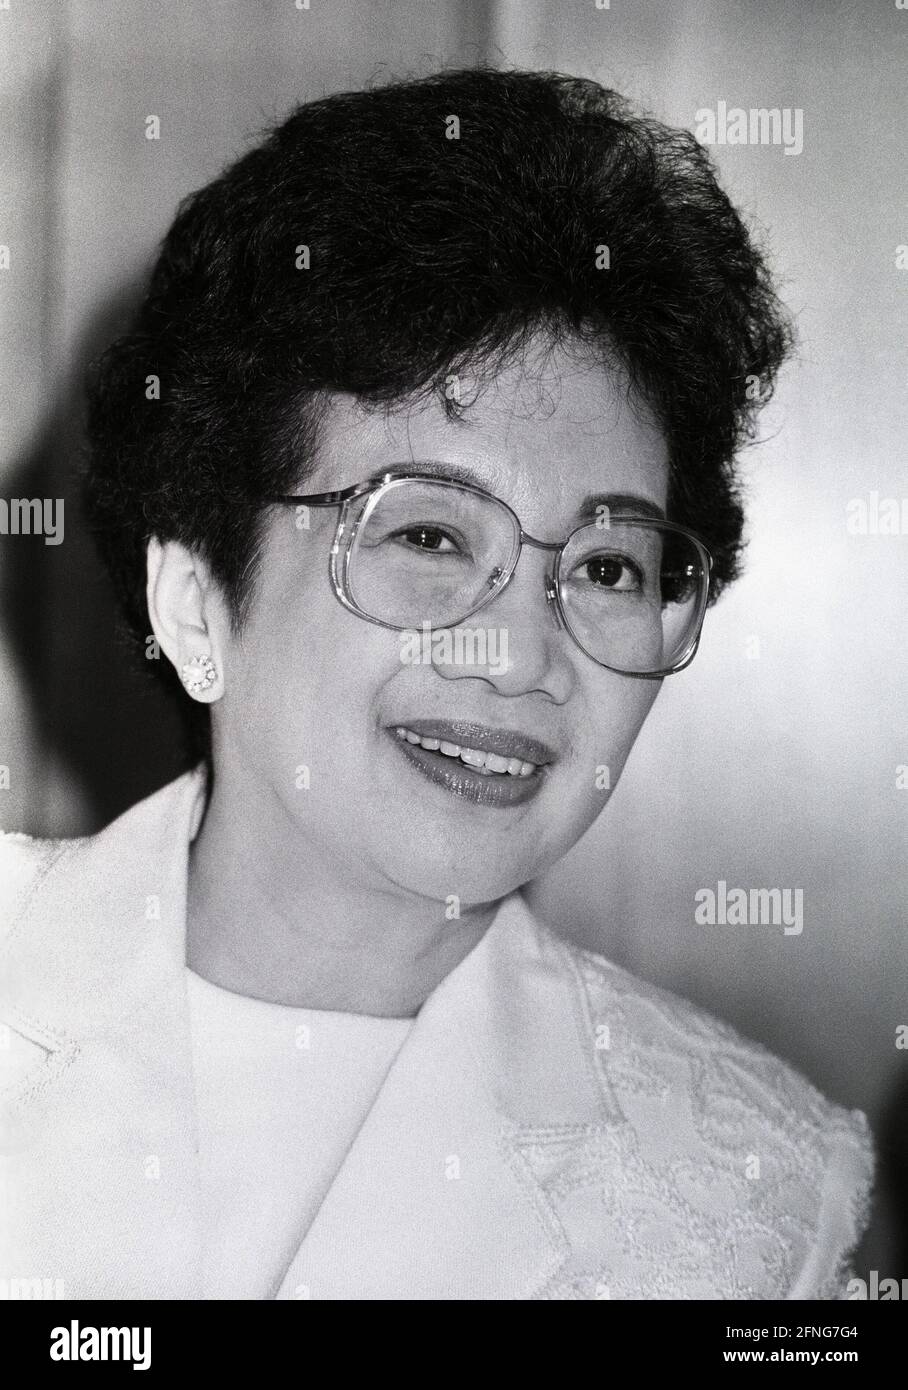 Germany, Bonn, 11.07.1989. Archive No: 07-13-27 State visit of the President of the Philippines Photo: President Corazon Aquino [automated translation] Stock Photo